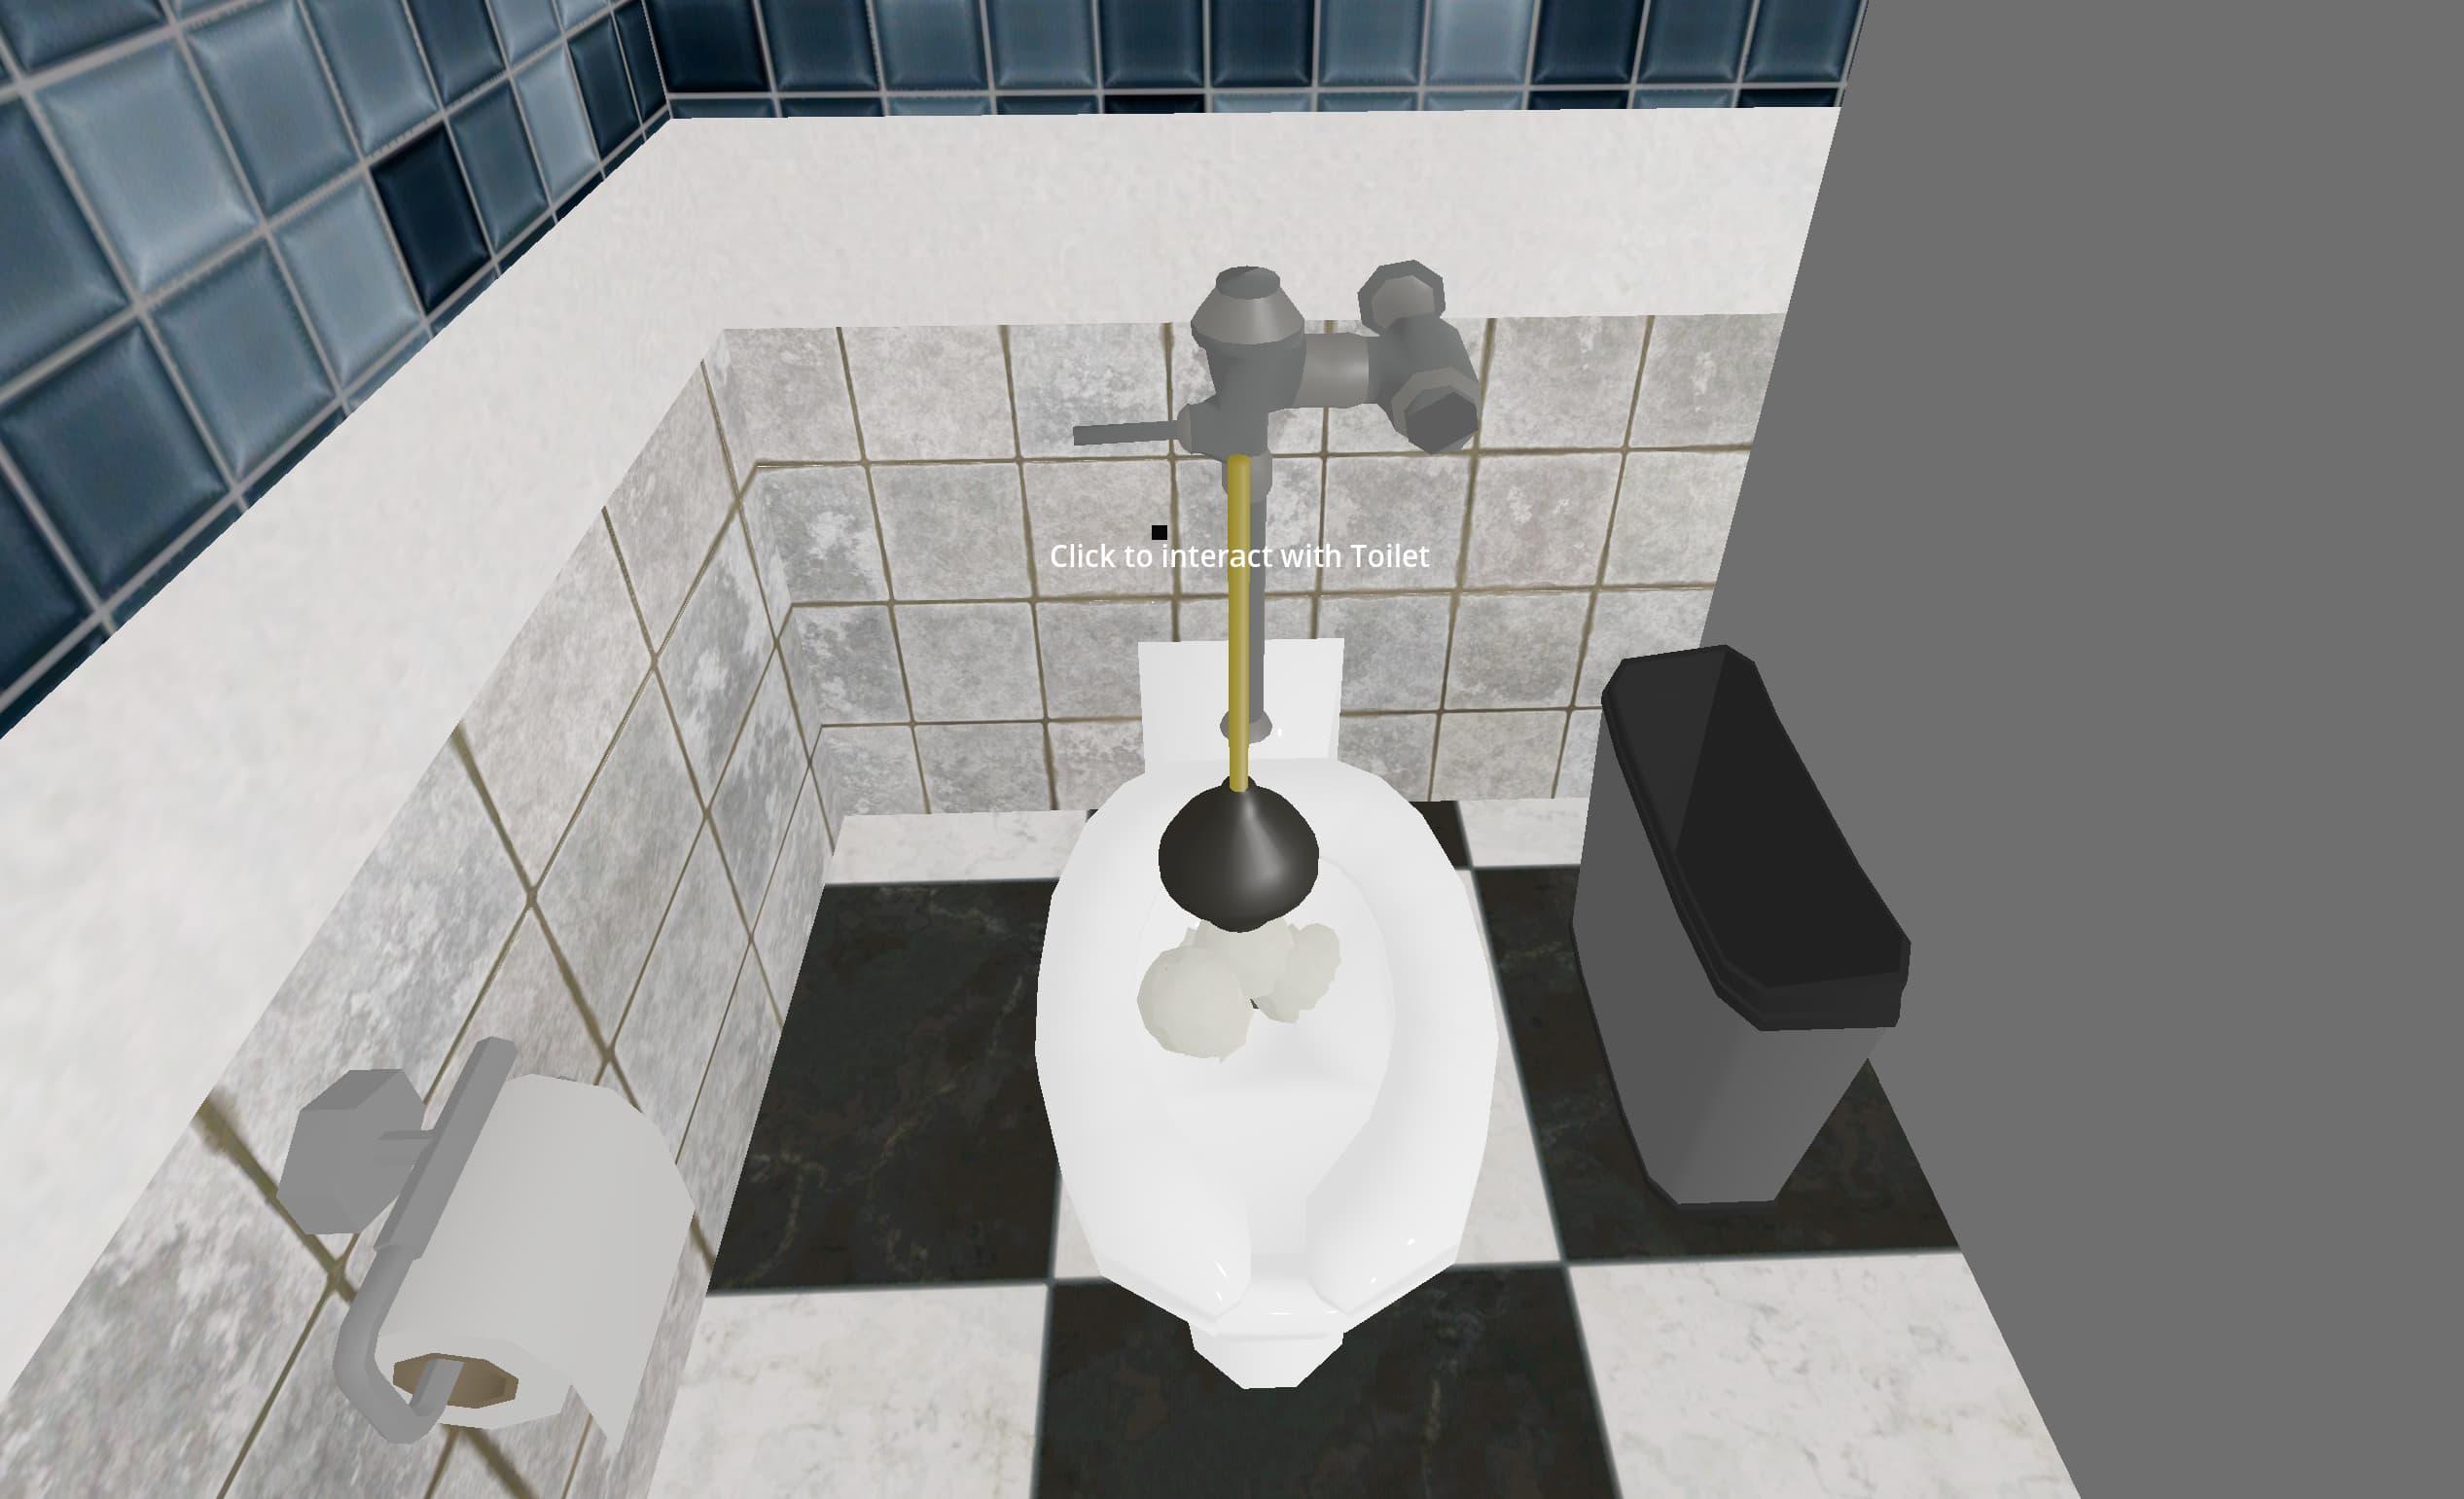 A plunger hovers over a clogged toilet